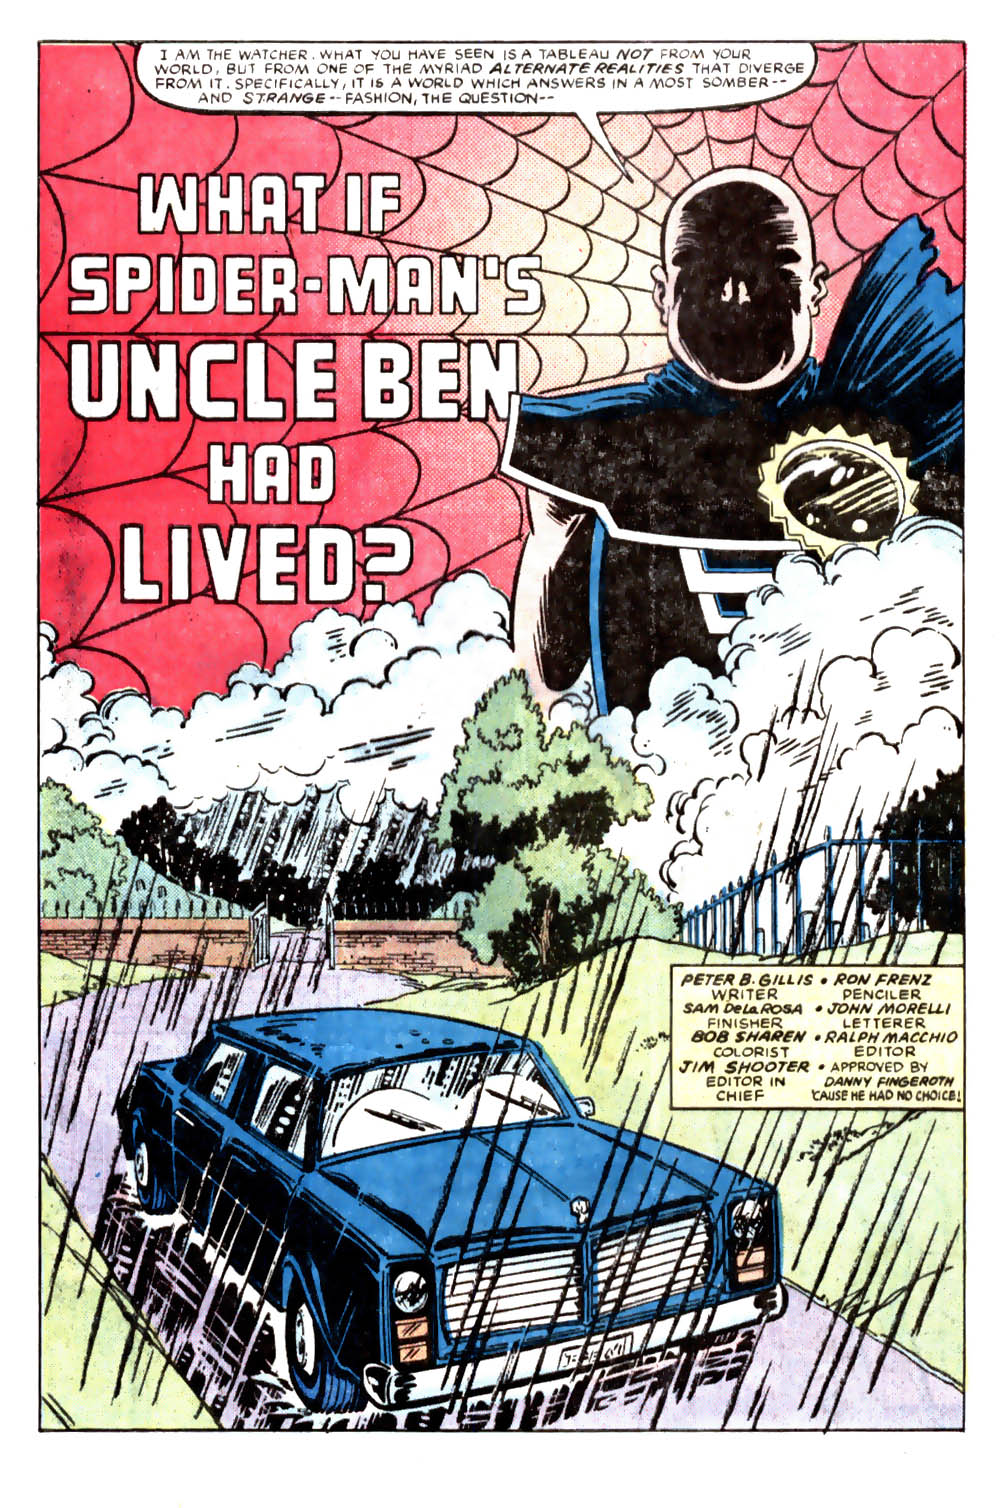 What If? (1977) issue 46 - Spiderman's uncle ben had lived - Page 4